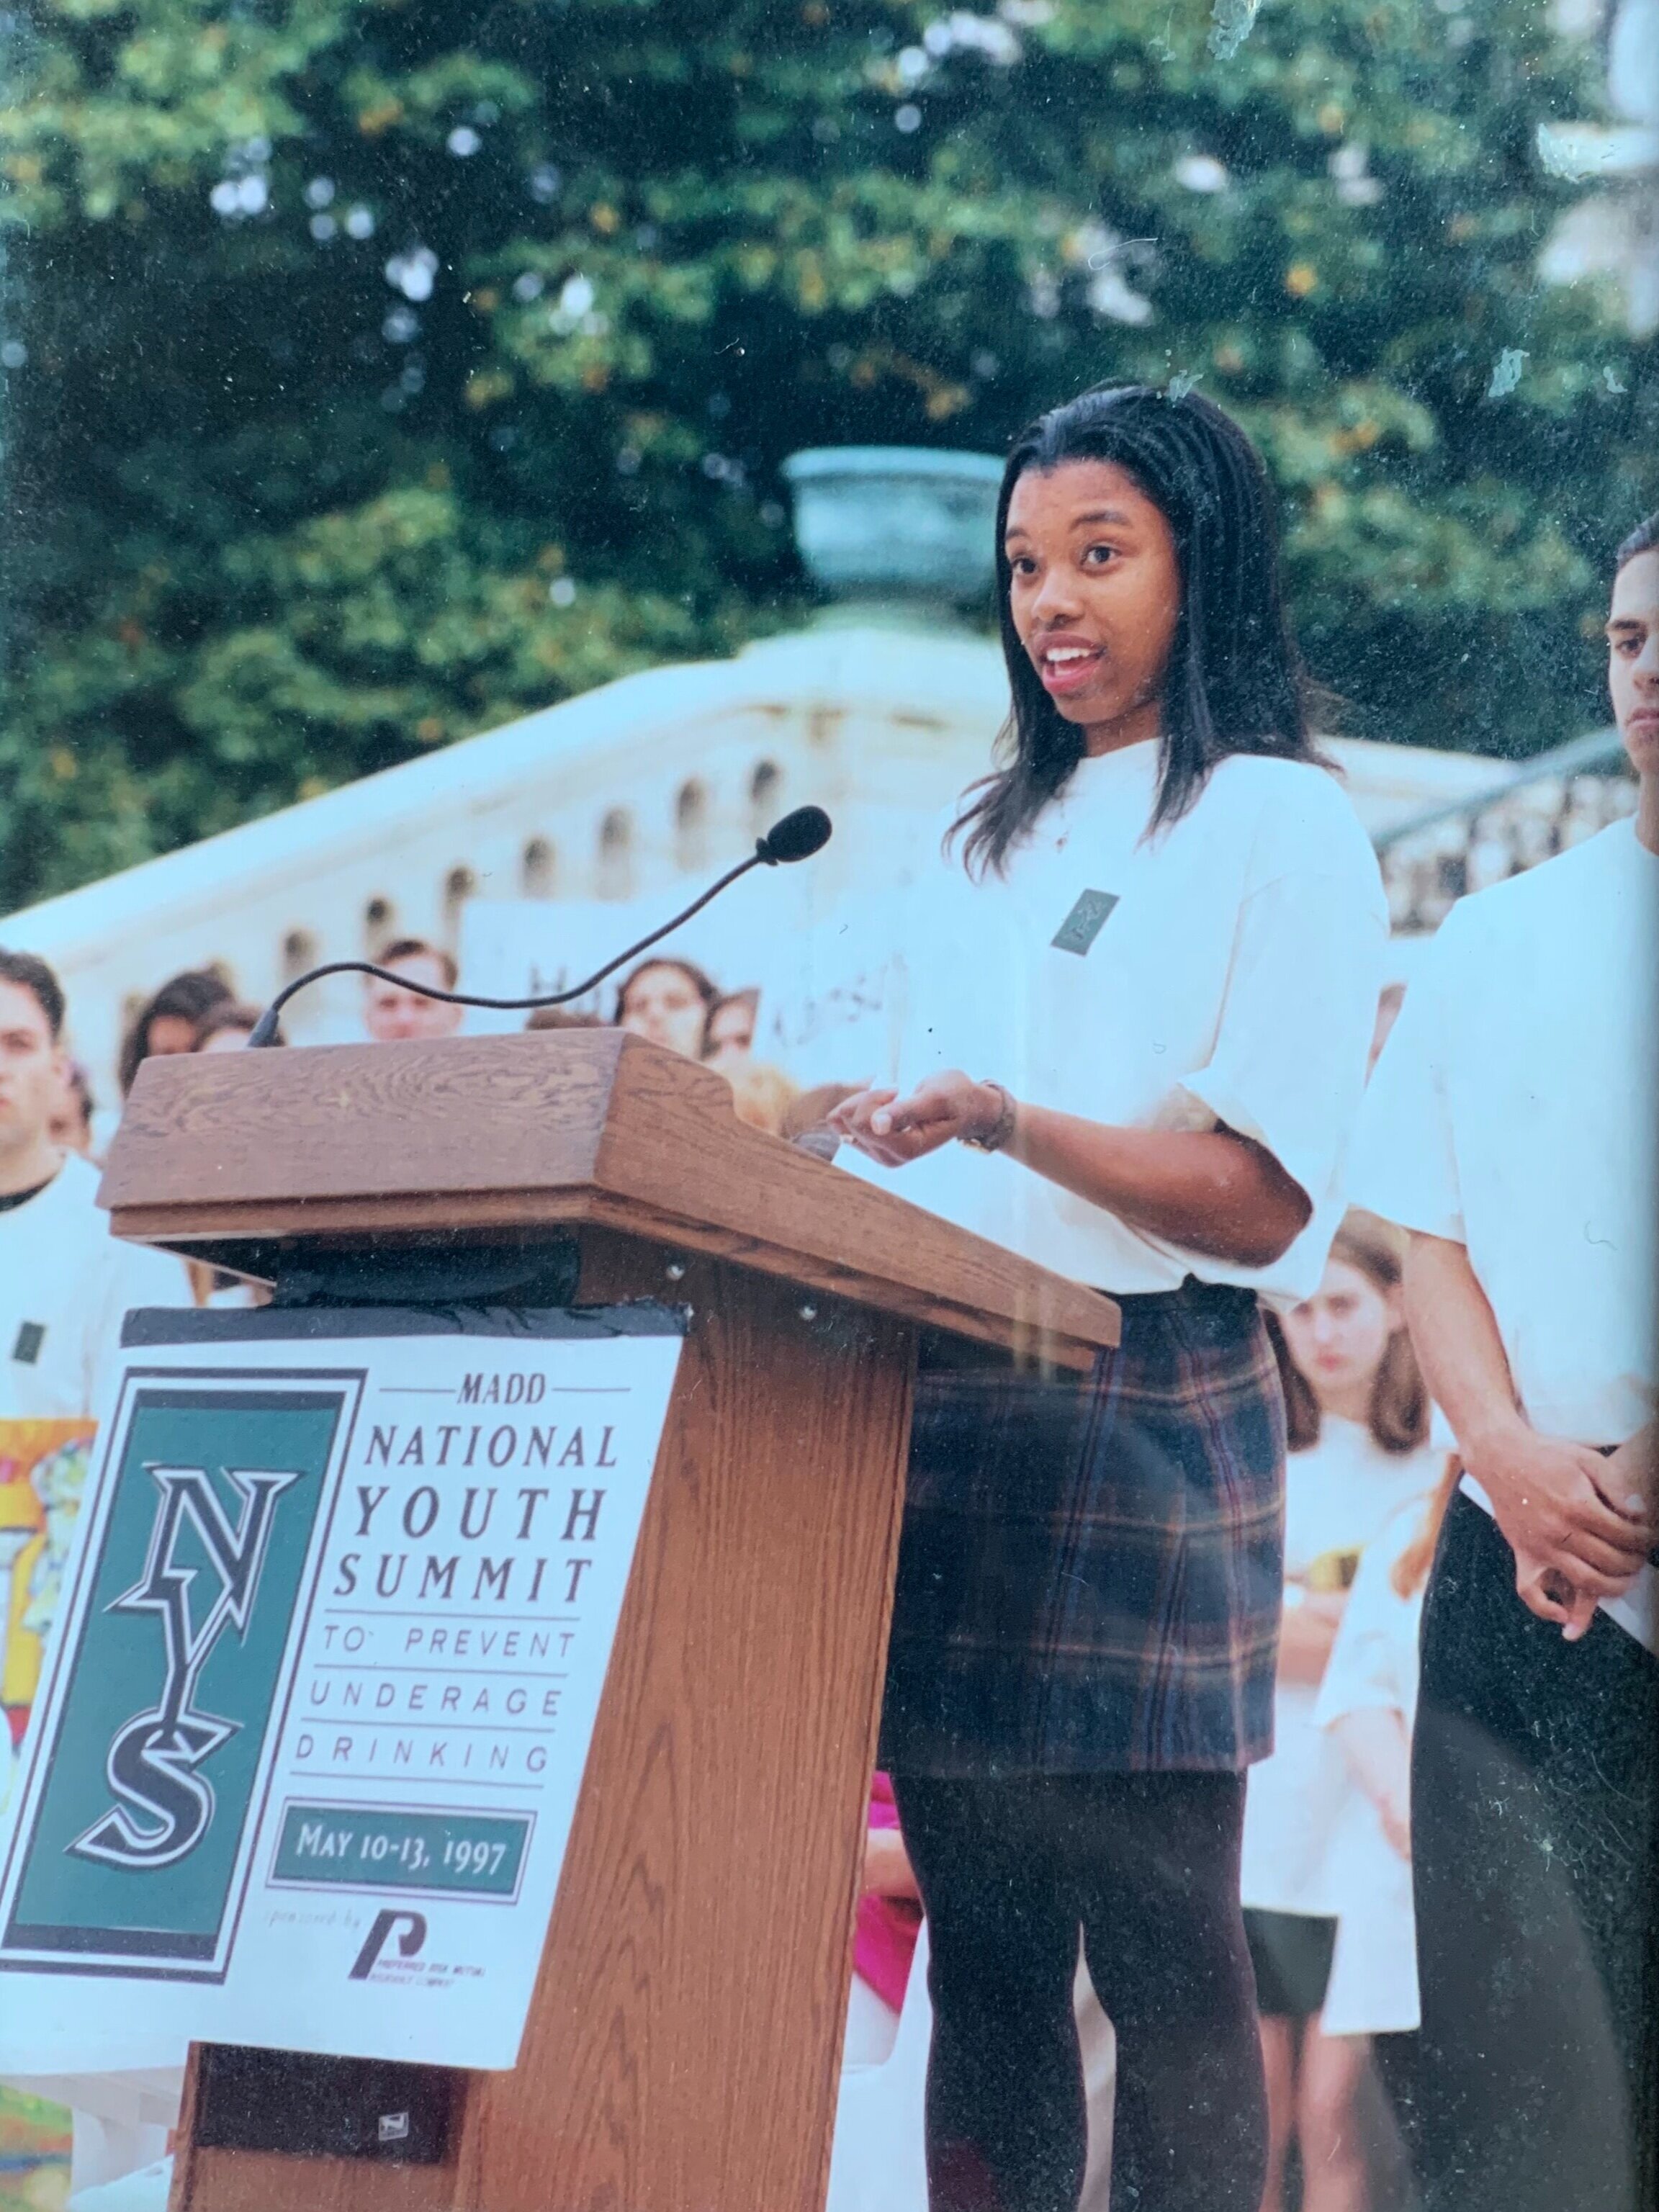 Jamila presenting her speech on the steps of the nation’s capitol during the MADD National Youth Summit in 1997.